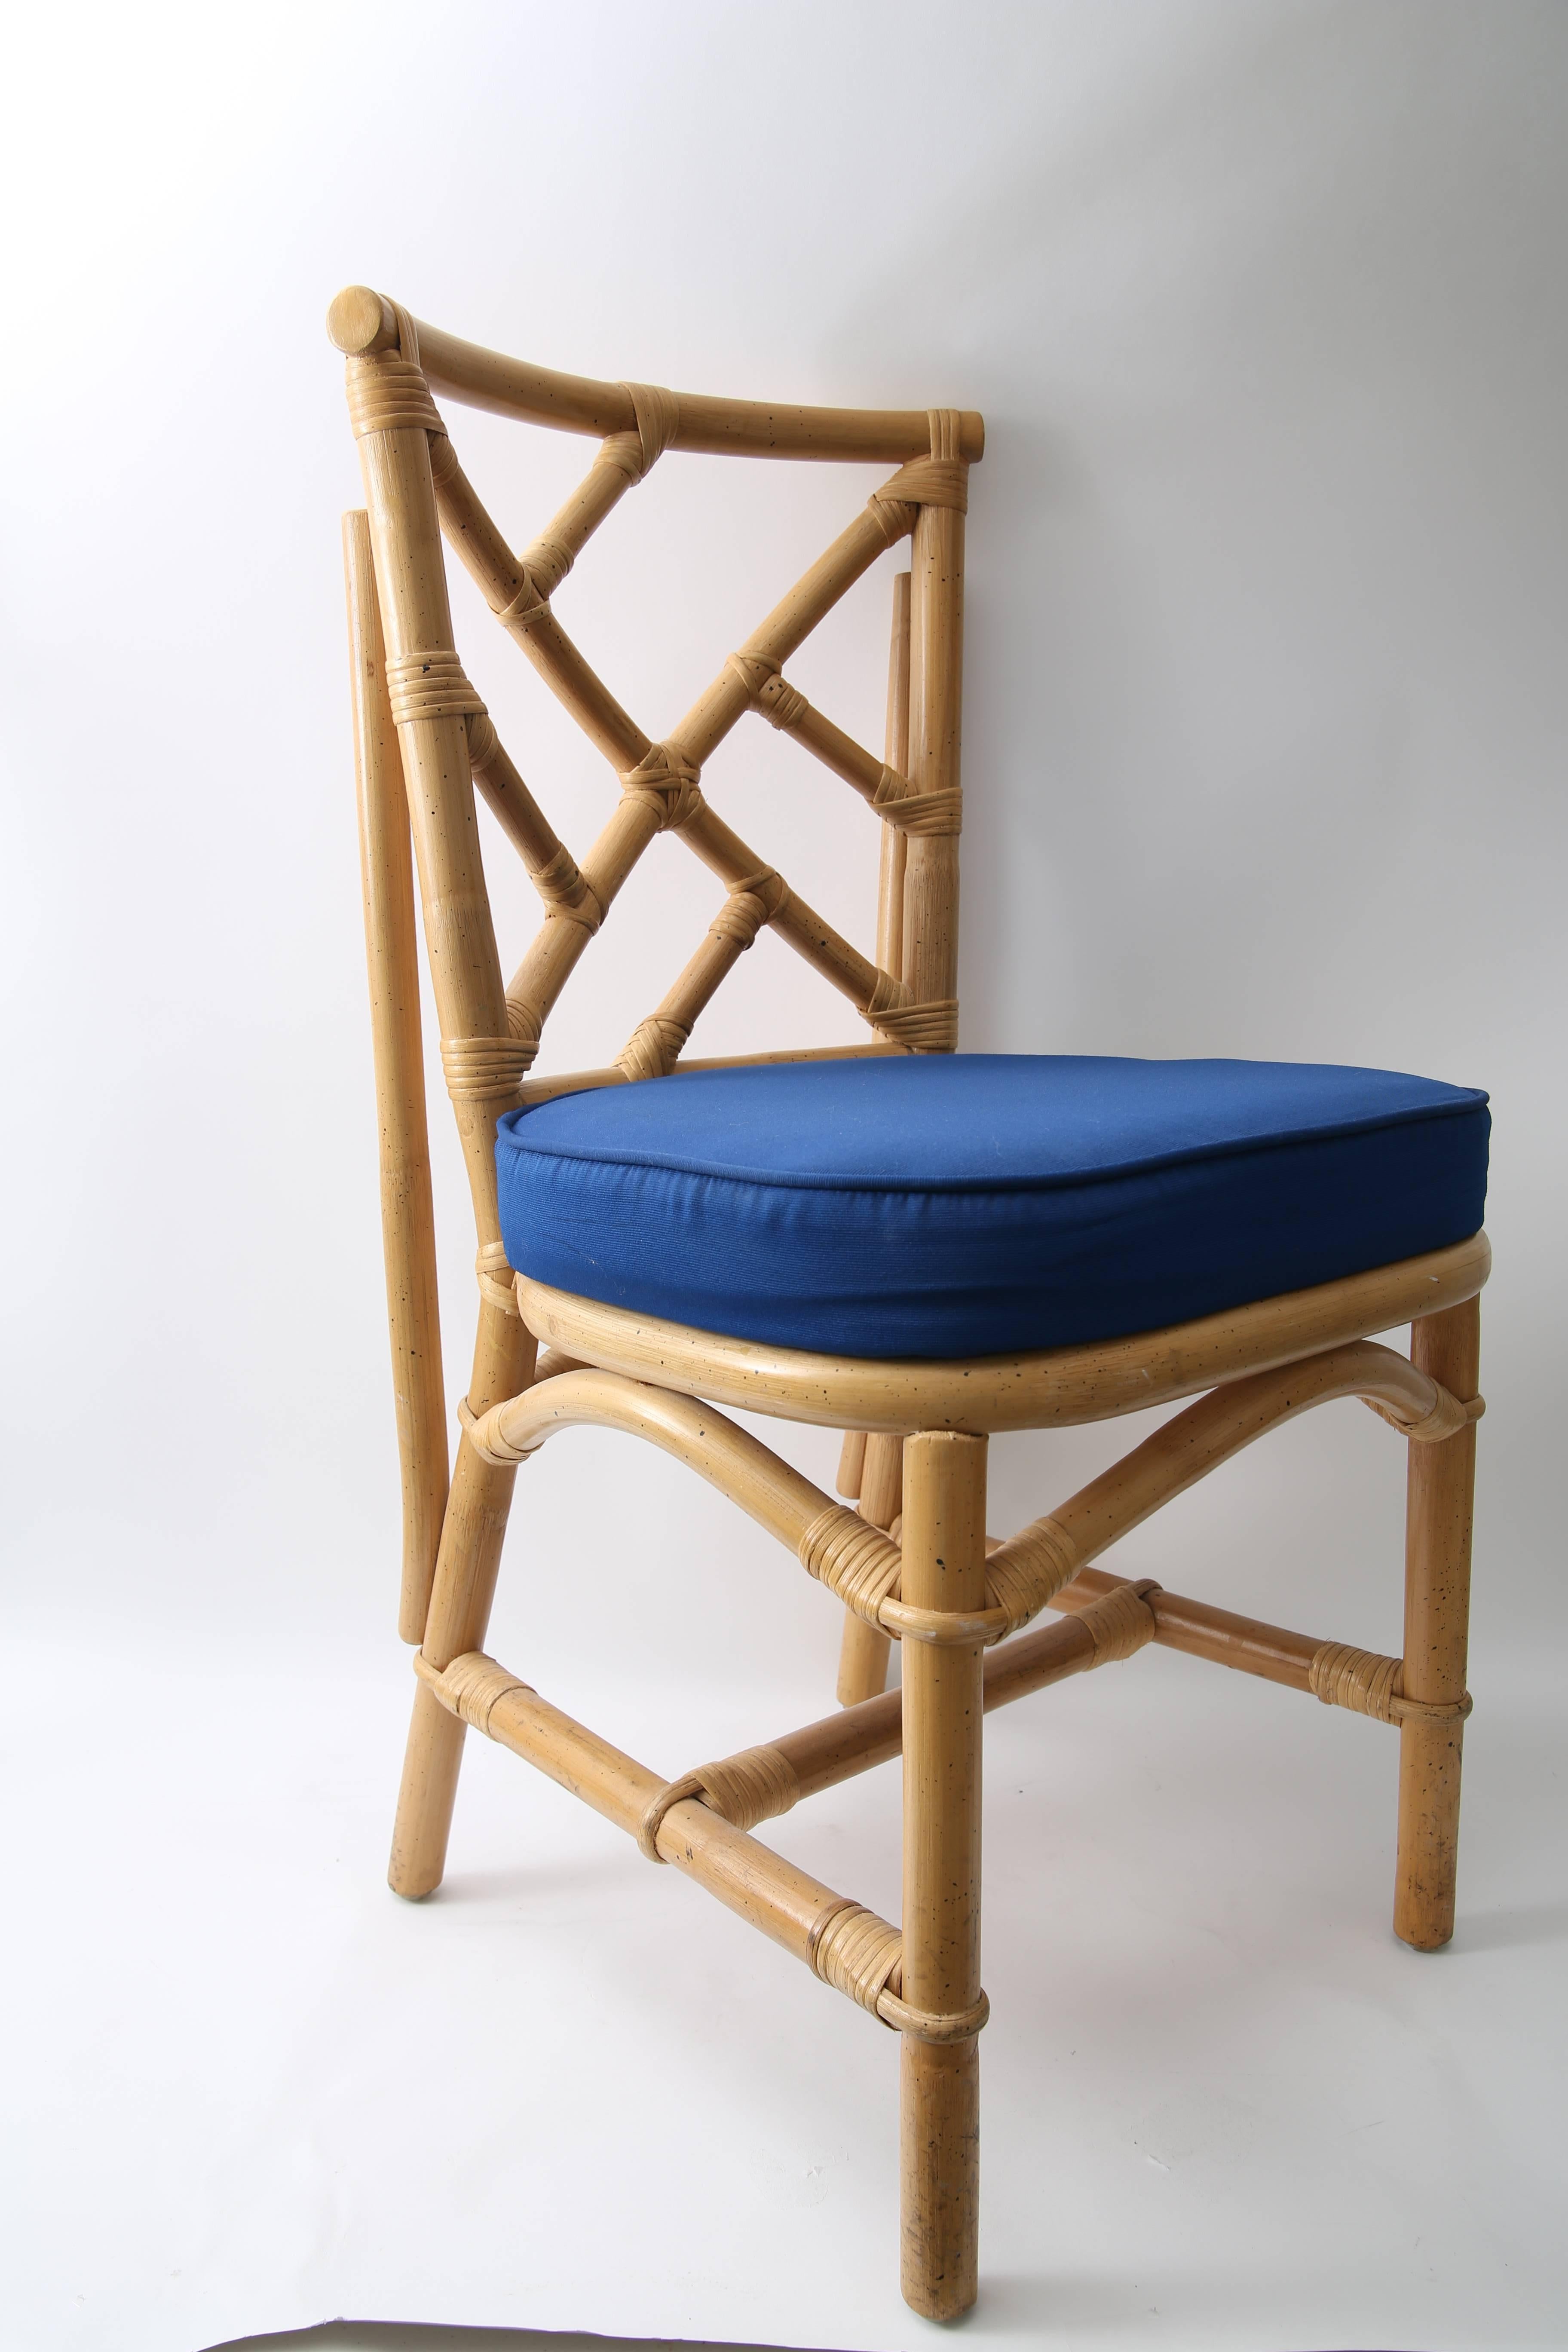 This stylish set of six side chairs are fabricated in bamboo with a fret-work Chippendale pattern and upholstered in a marine blue woven fabric.

Note: We also have the same chairs available in quantities of a four-piece or two-piece set priced at